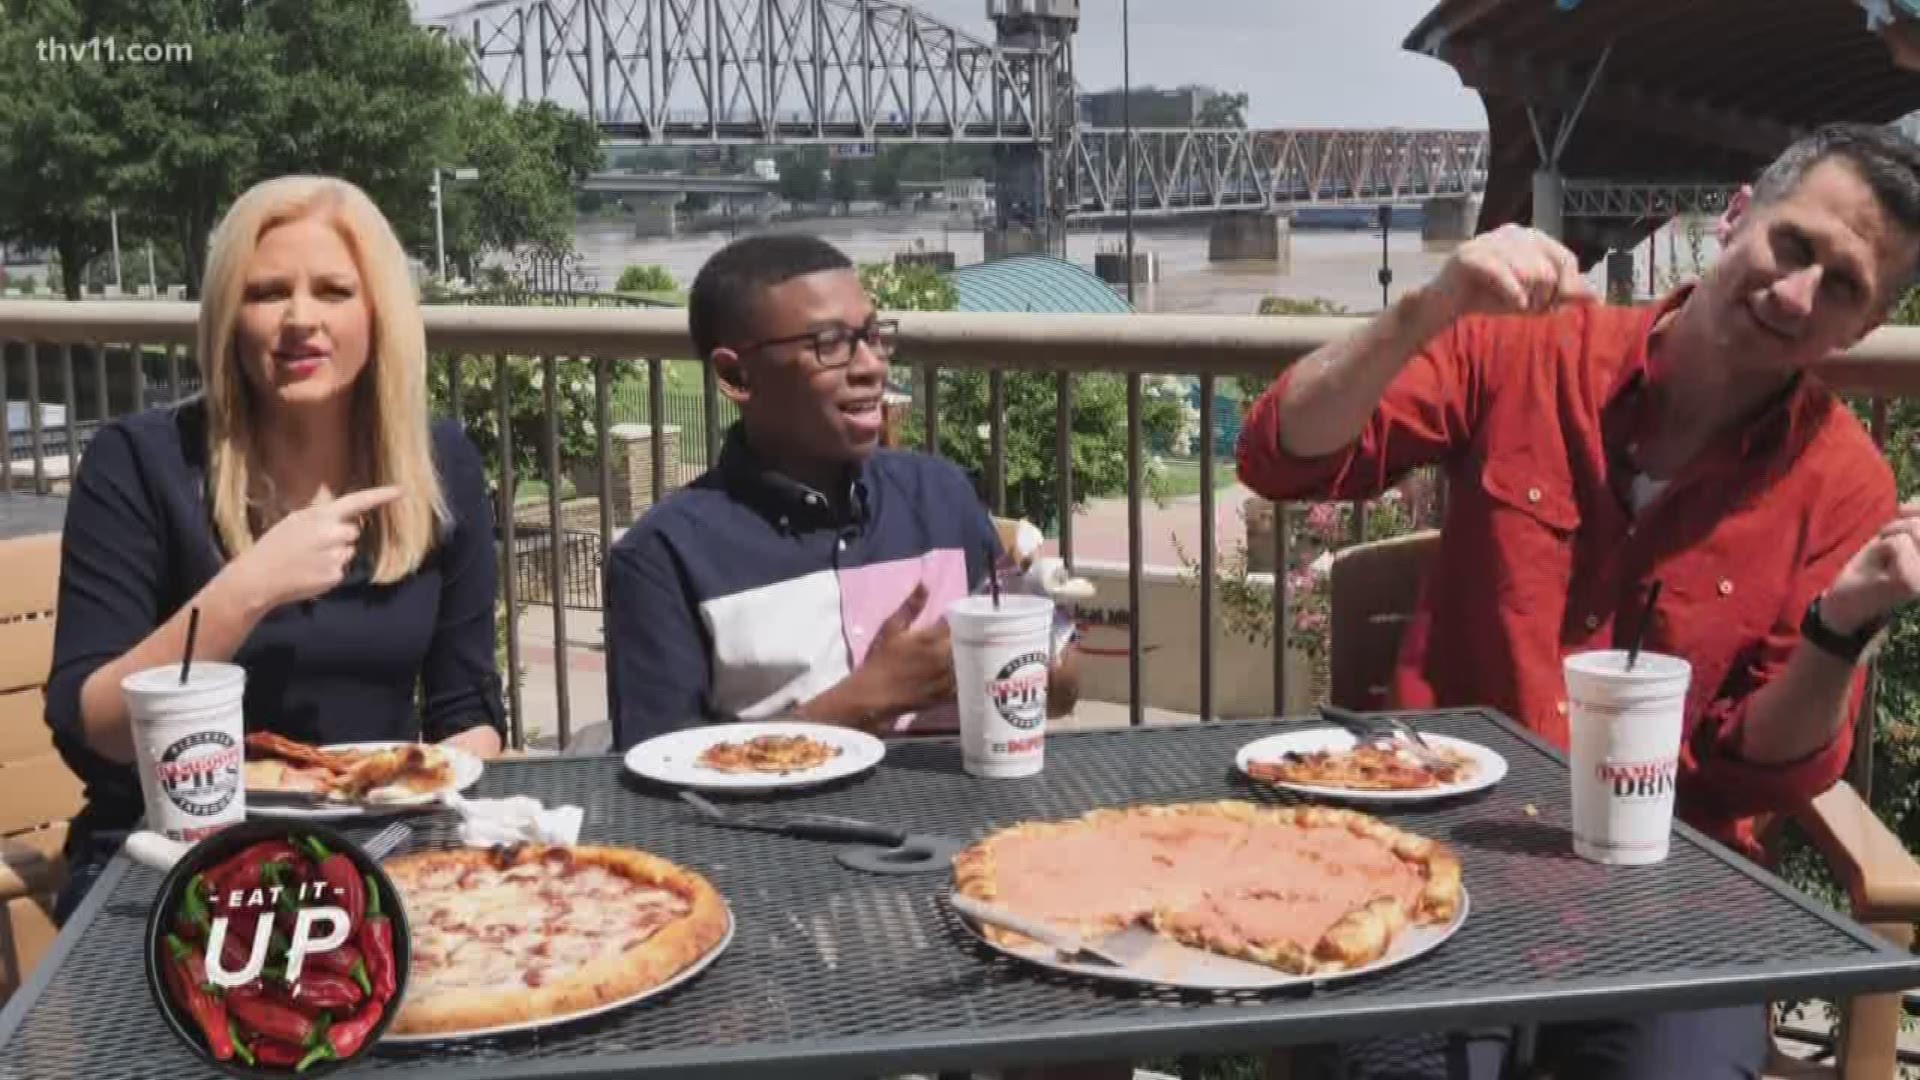 We're kicking off a new month of Eat It Up with a very special guest. We're introducing you to Blake, and what he thought about Dam Goode Pies! From their unique trademark “stuffy” pizzas to “the pink sauce” there’s a lot to try that may surprise you!